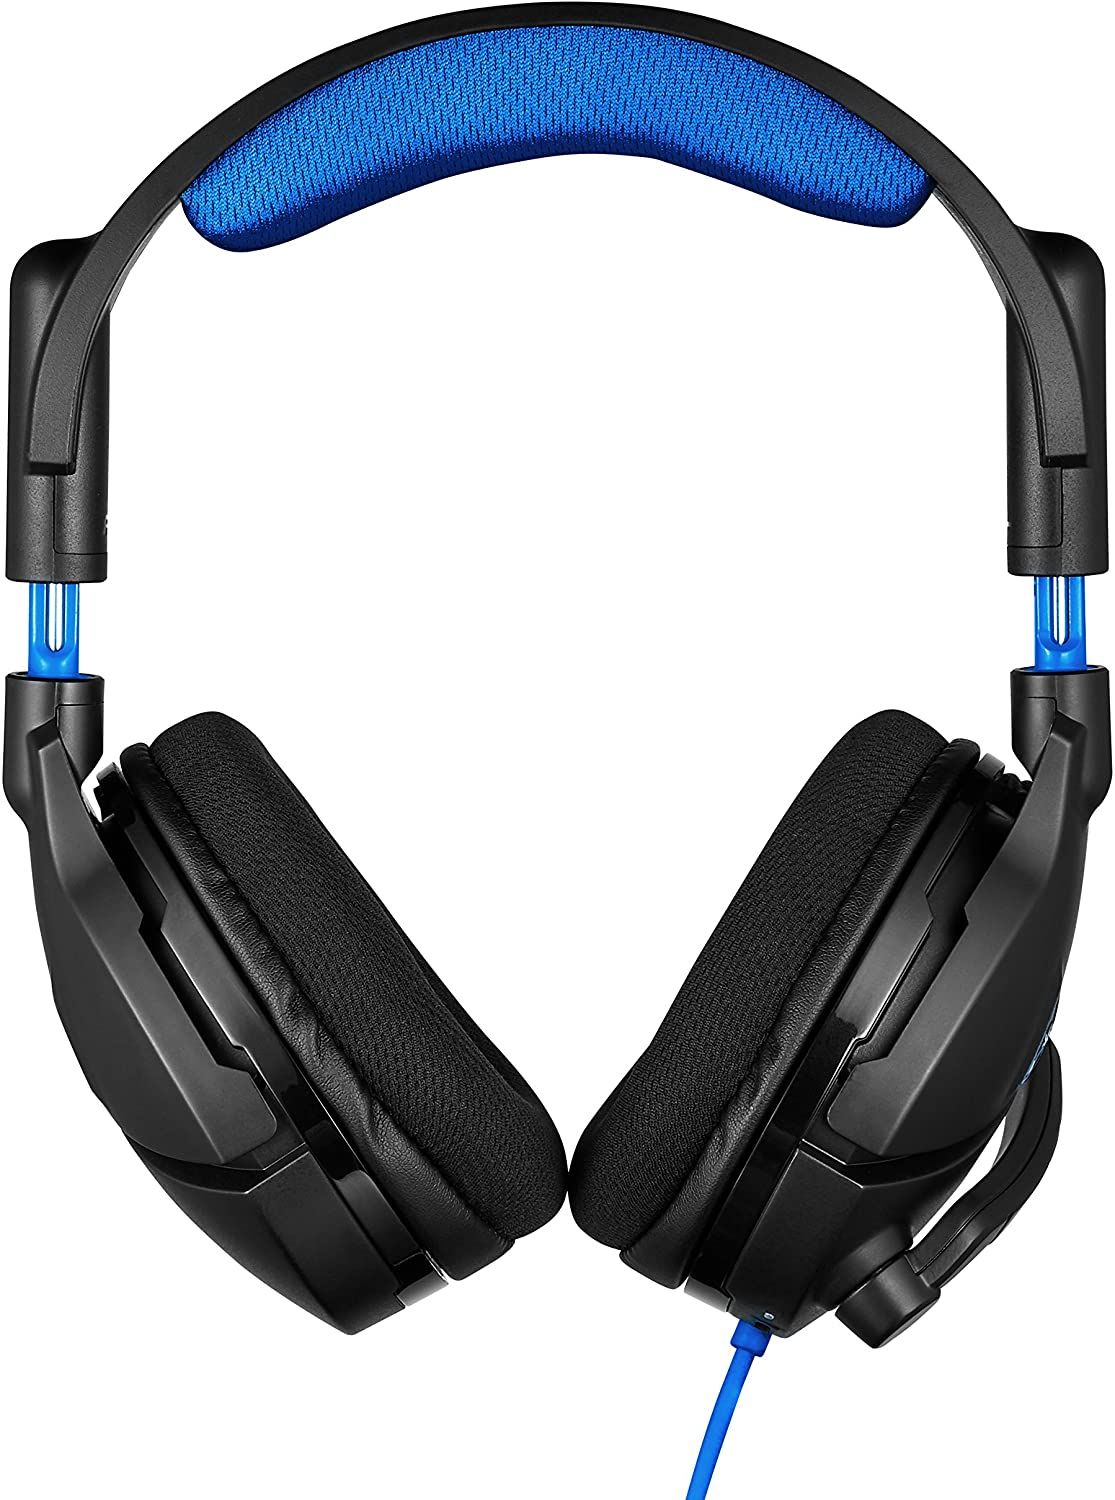 Turtle Beach Stealth 300 Gaming Headset - Blue/Black (PS4)